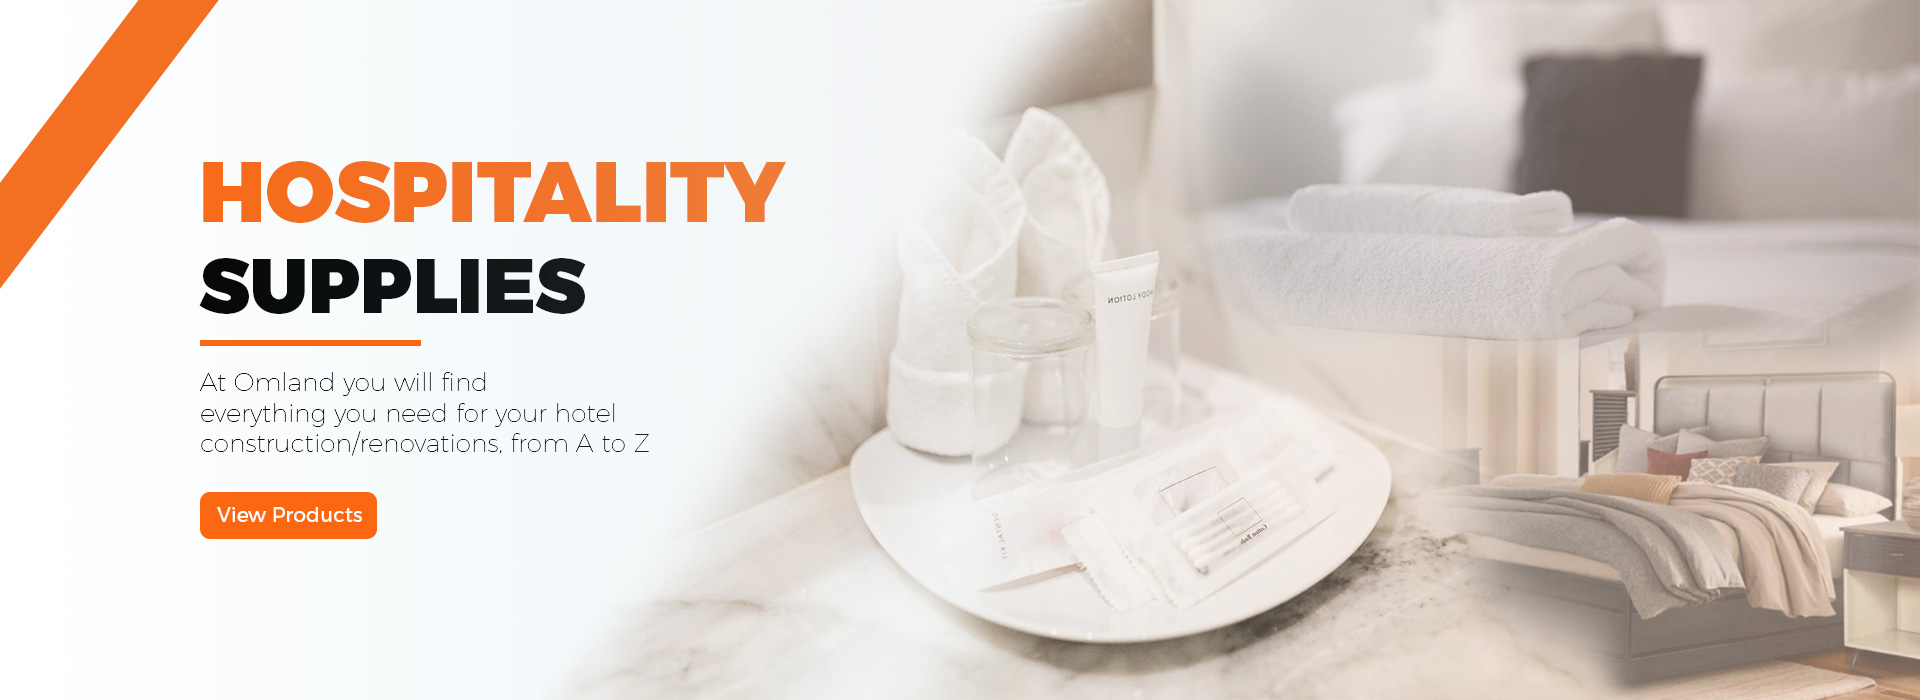 Hospitality Supplies Banner